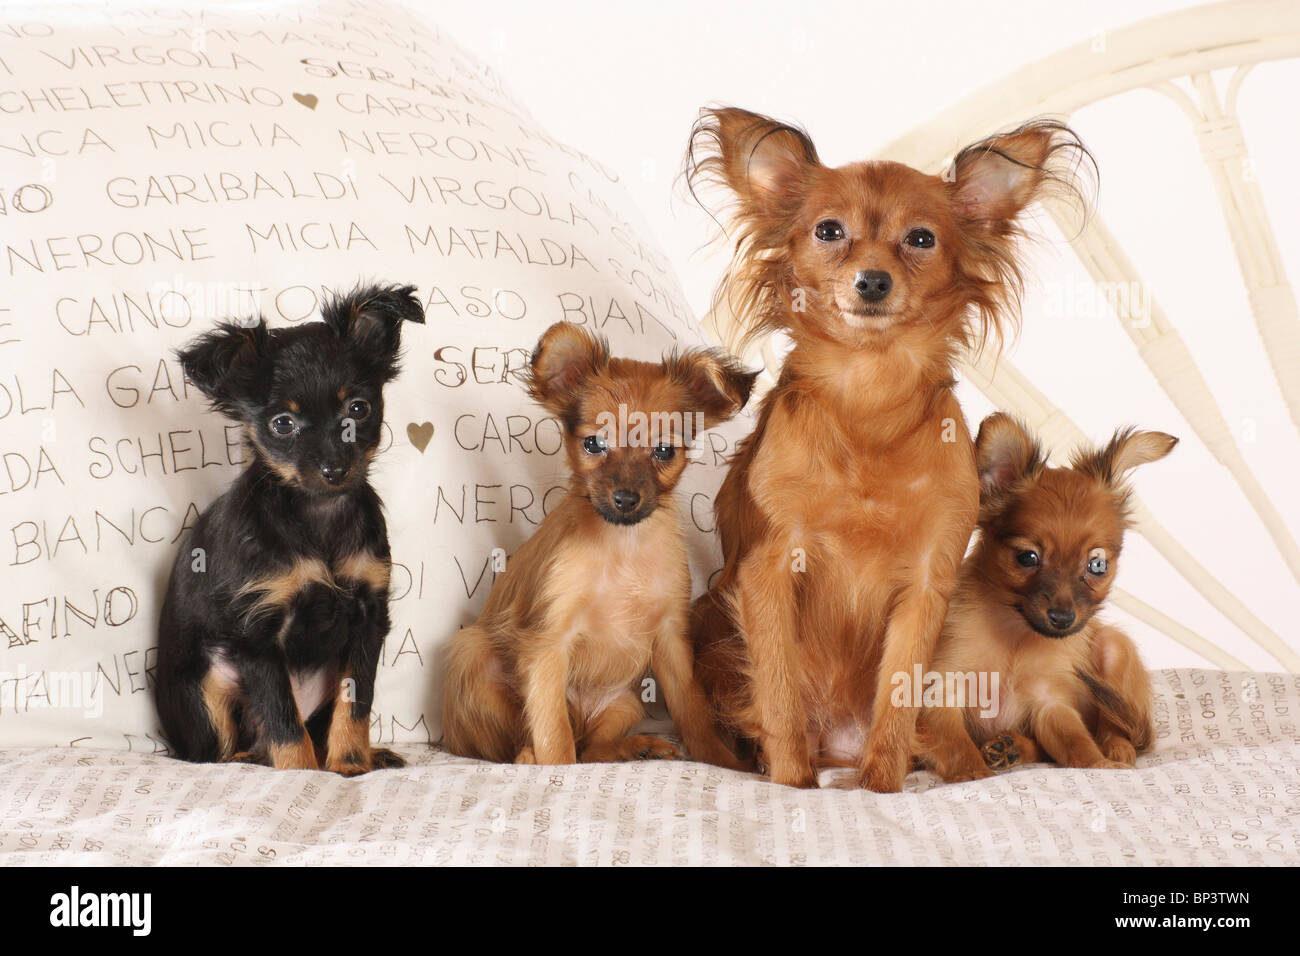 Russian Toy Terrier dog with three puppies on a bed Stock Photo